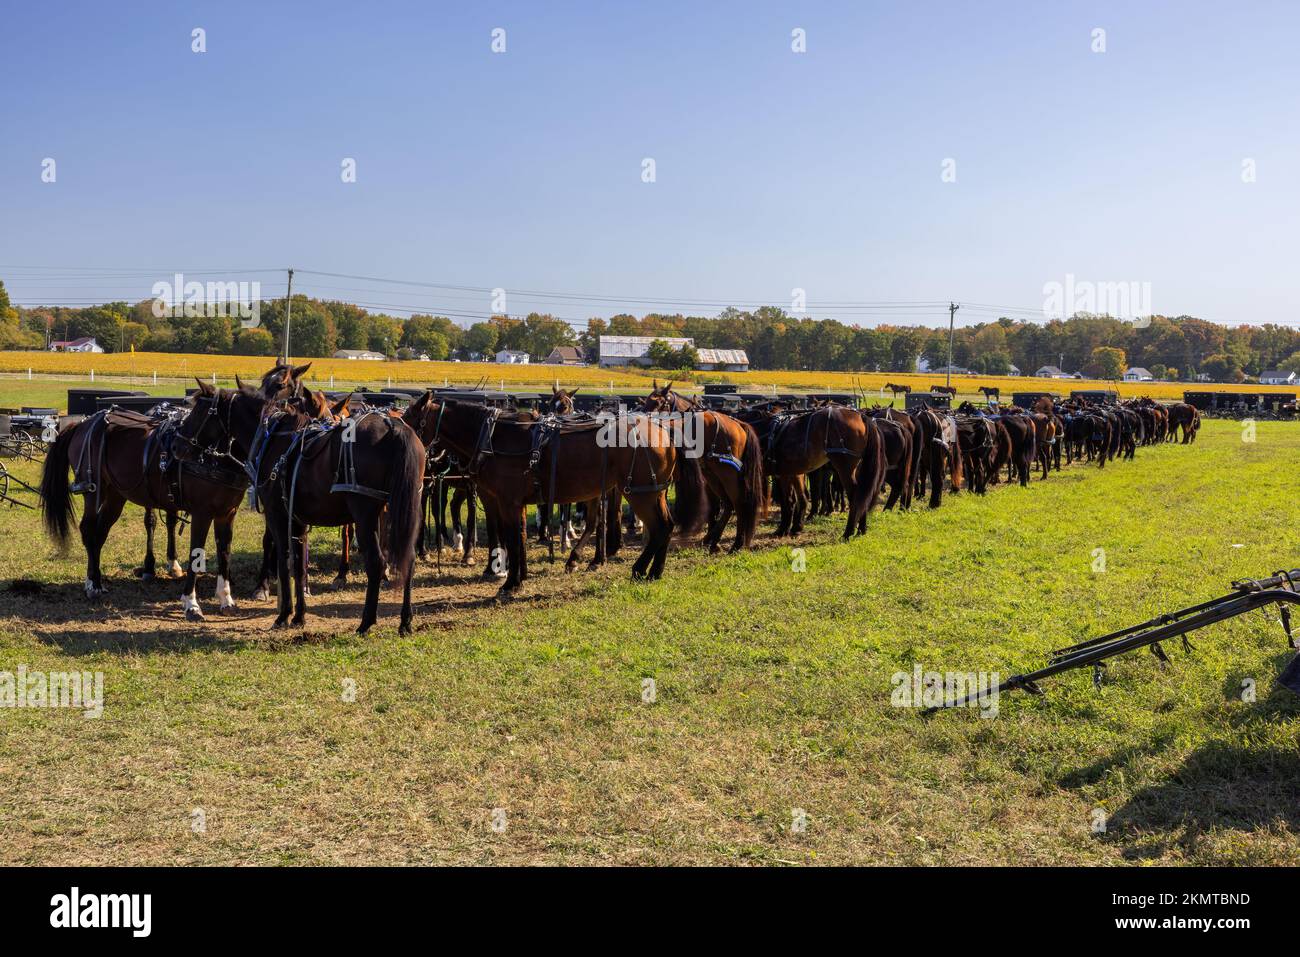 Horses lined up in a grassy field at an auction in Casson Corner, Kent County, Delaware Stock Photo